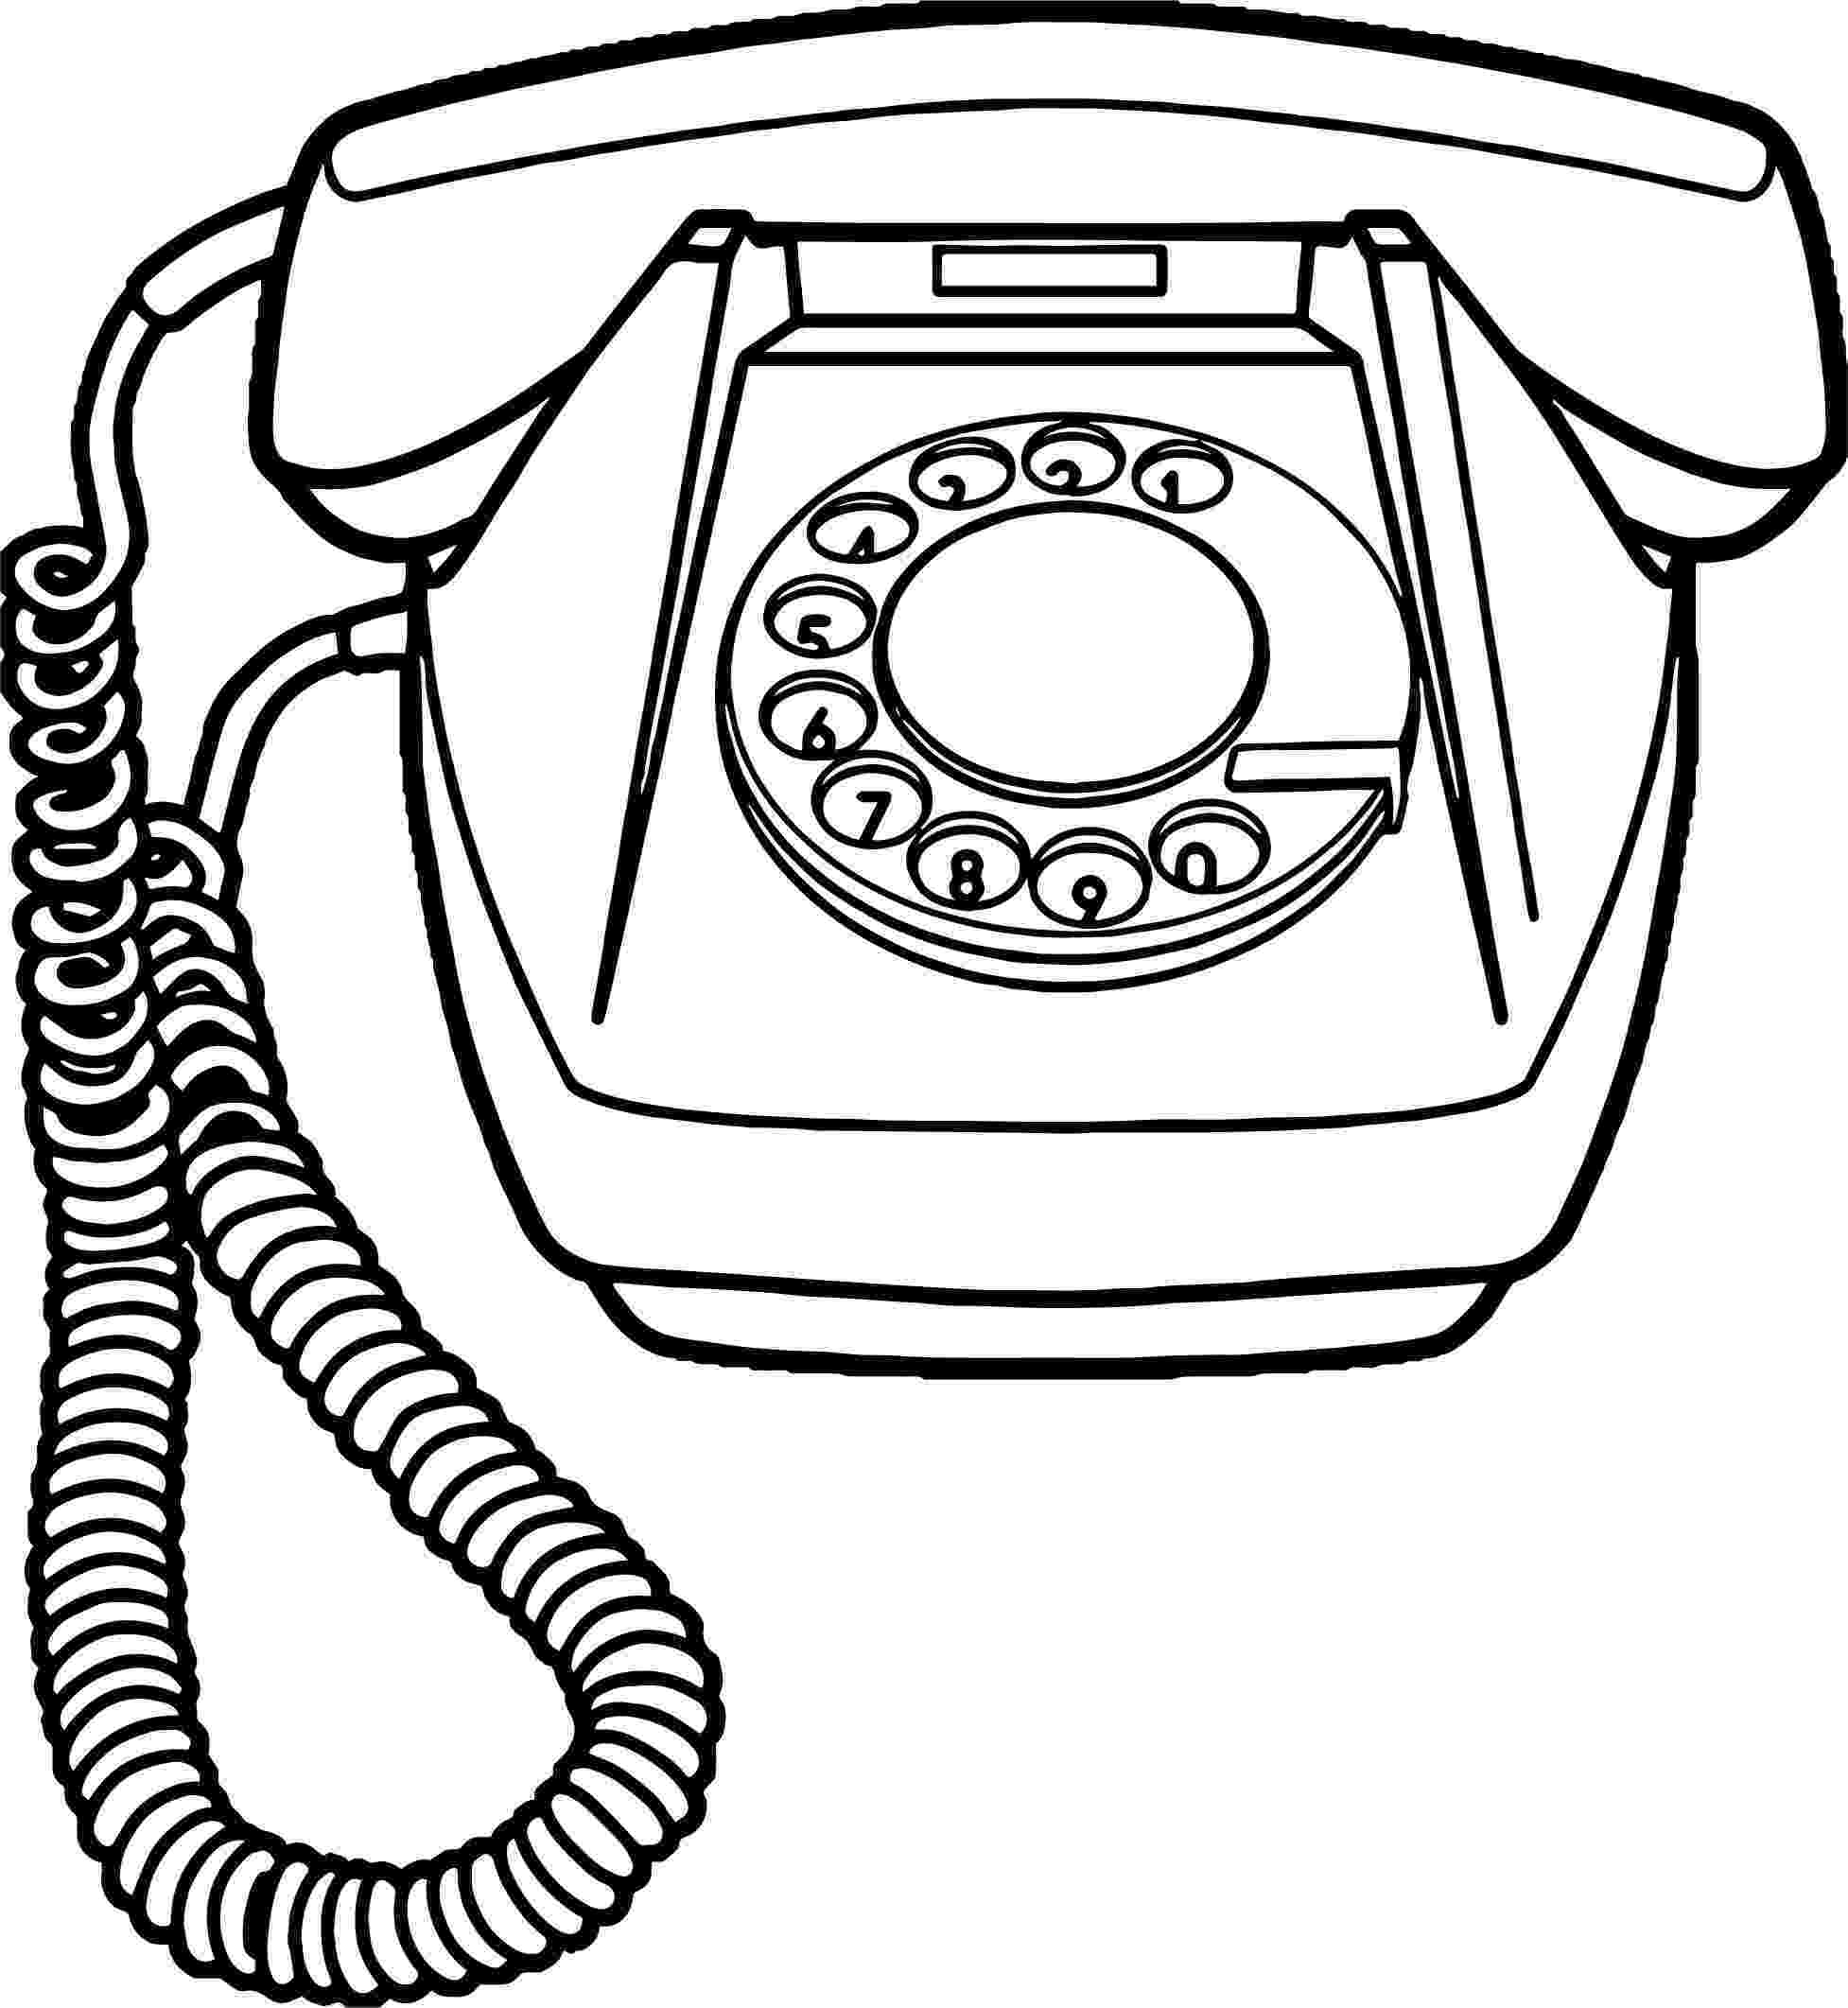 telephone coloring pages coloring pages of cell phones page 1 coloring home pages telephone coloring 